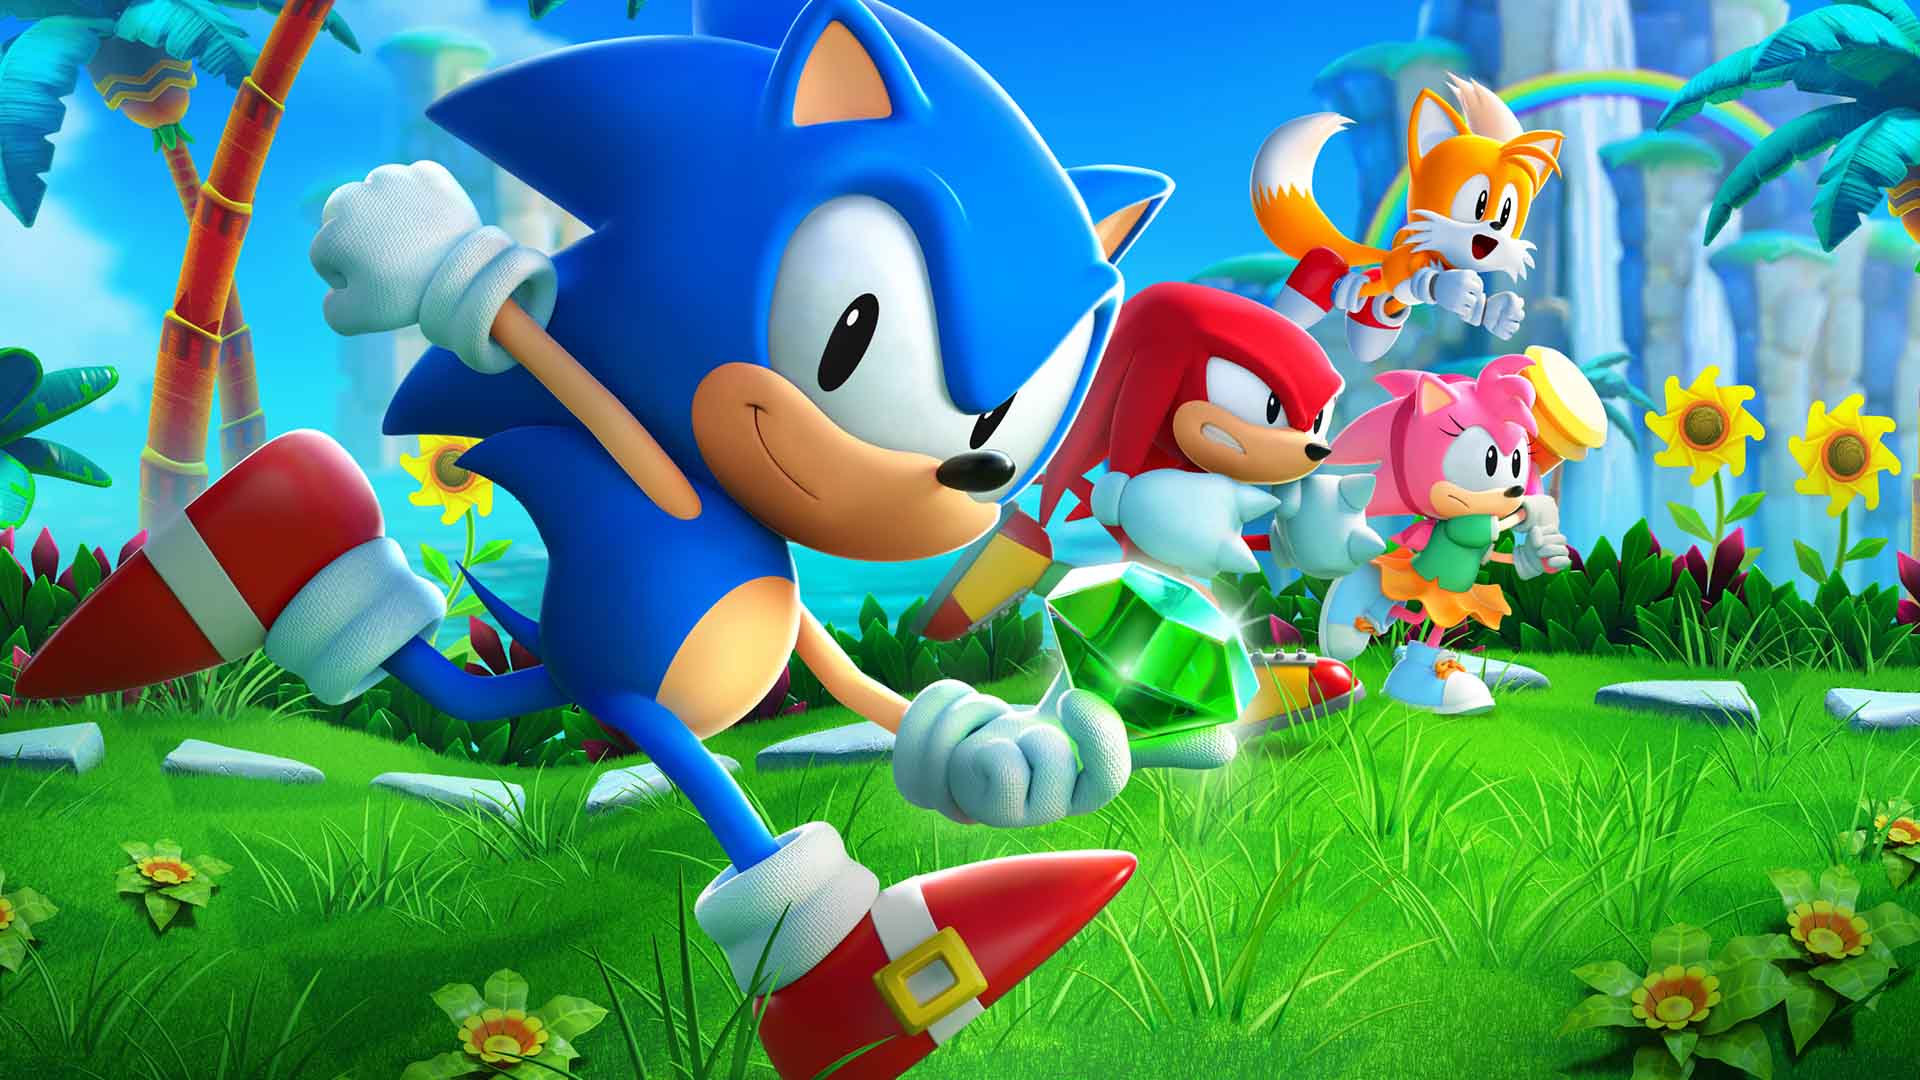 Games you can play on your Vita: Sonic 2, The Long Version 